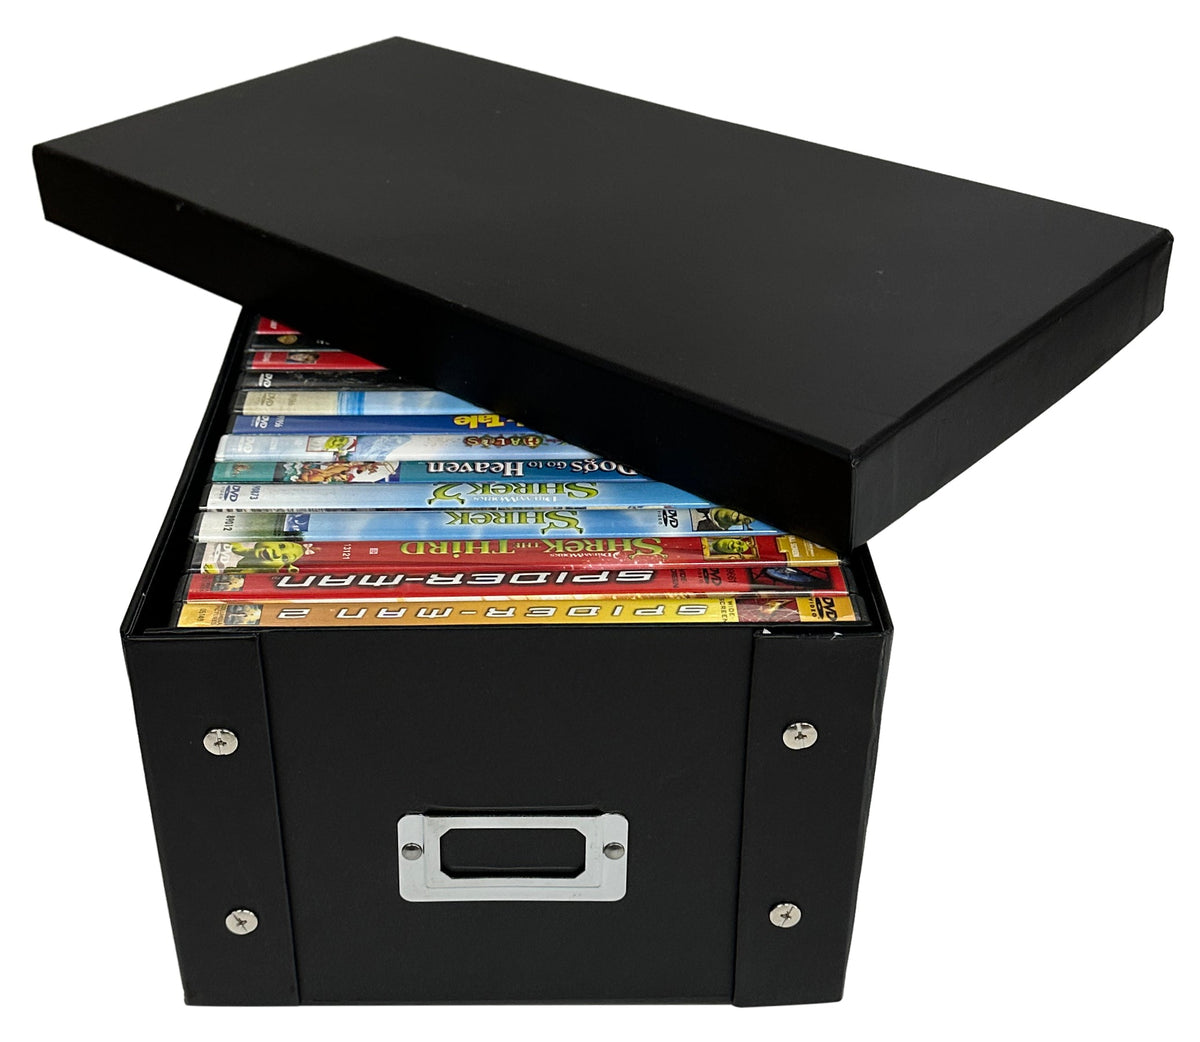 CheckOutStore Black DVD Cases Storage Box (Holds 25 Cases)